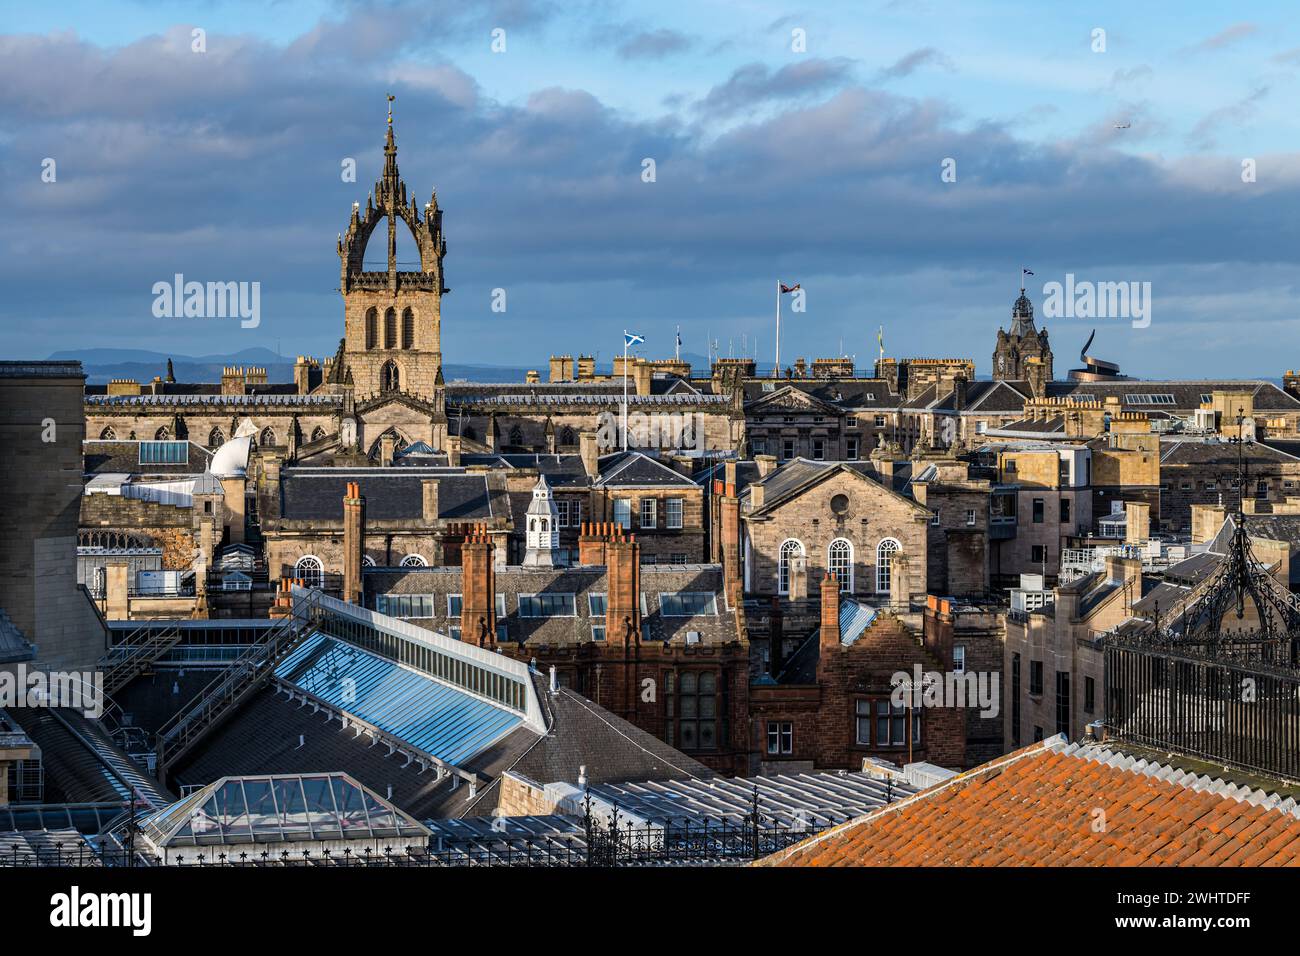 View over rooftops of St Gile's Church spire with Edinburgh city skyline, Scotland, UK Stock Photo